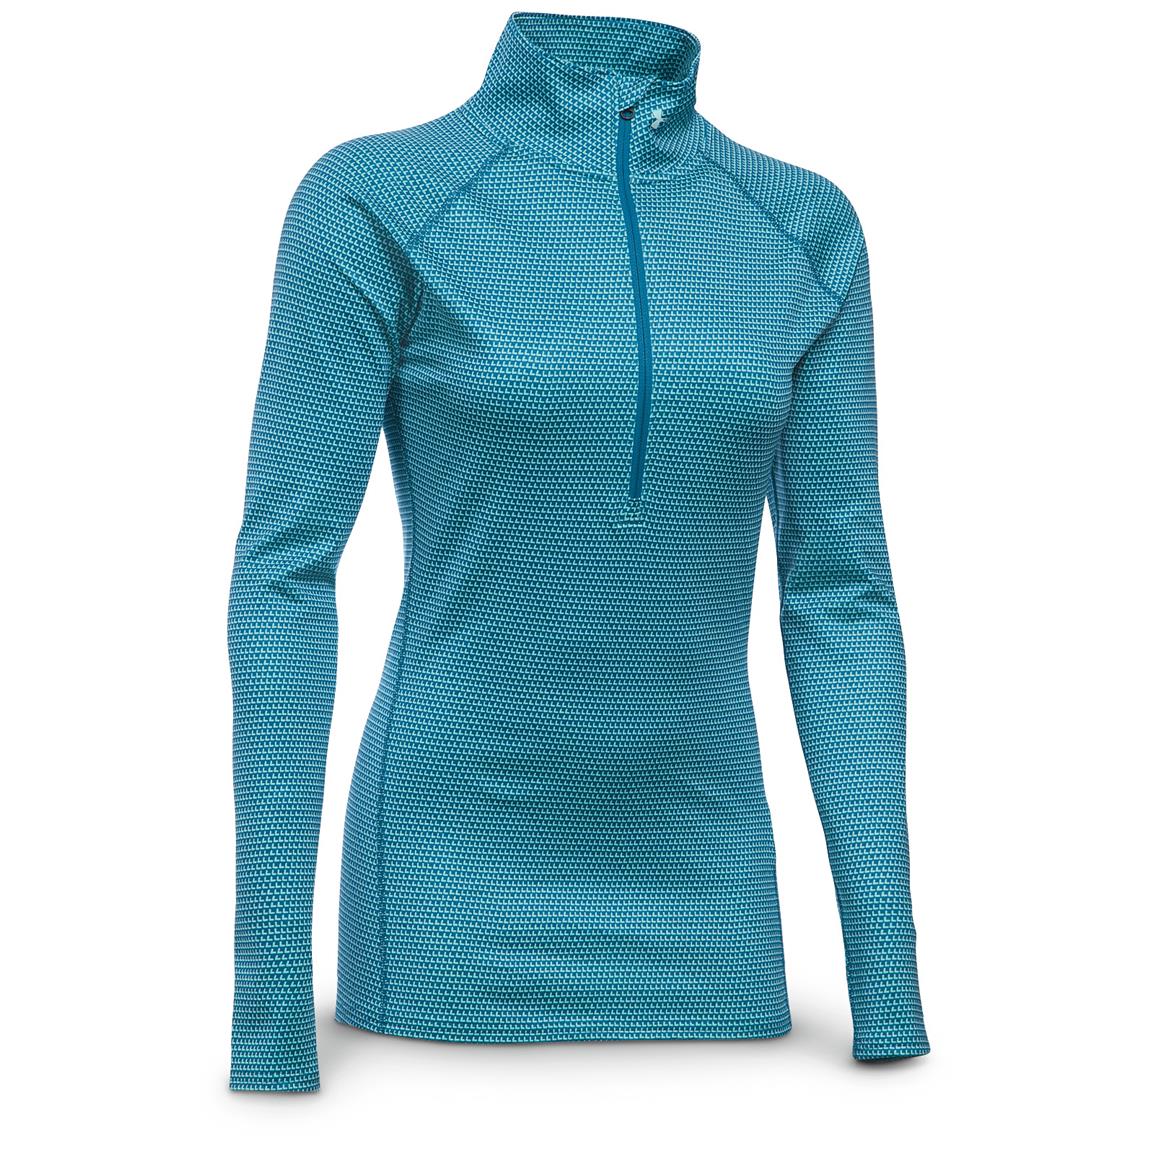 Cheap blue under armour cold gear Buy 